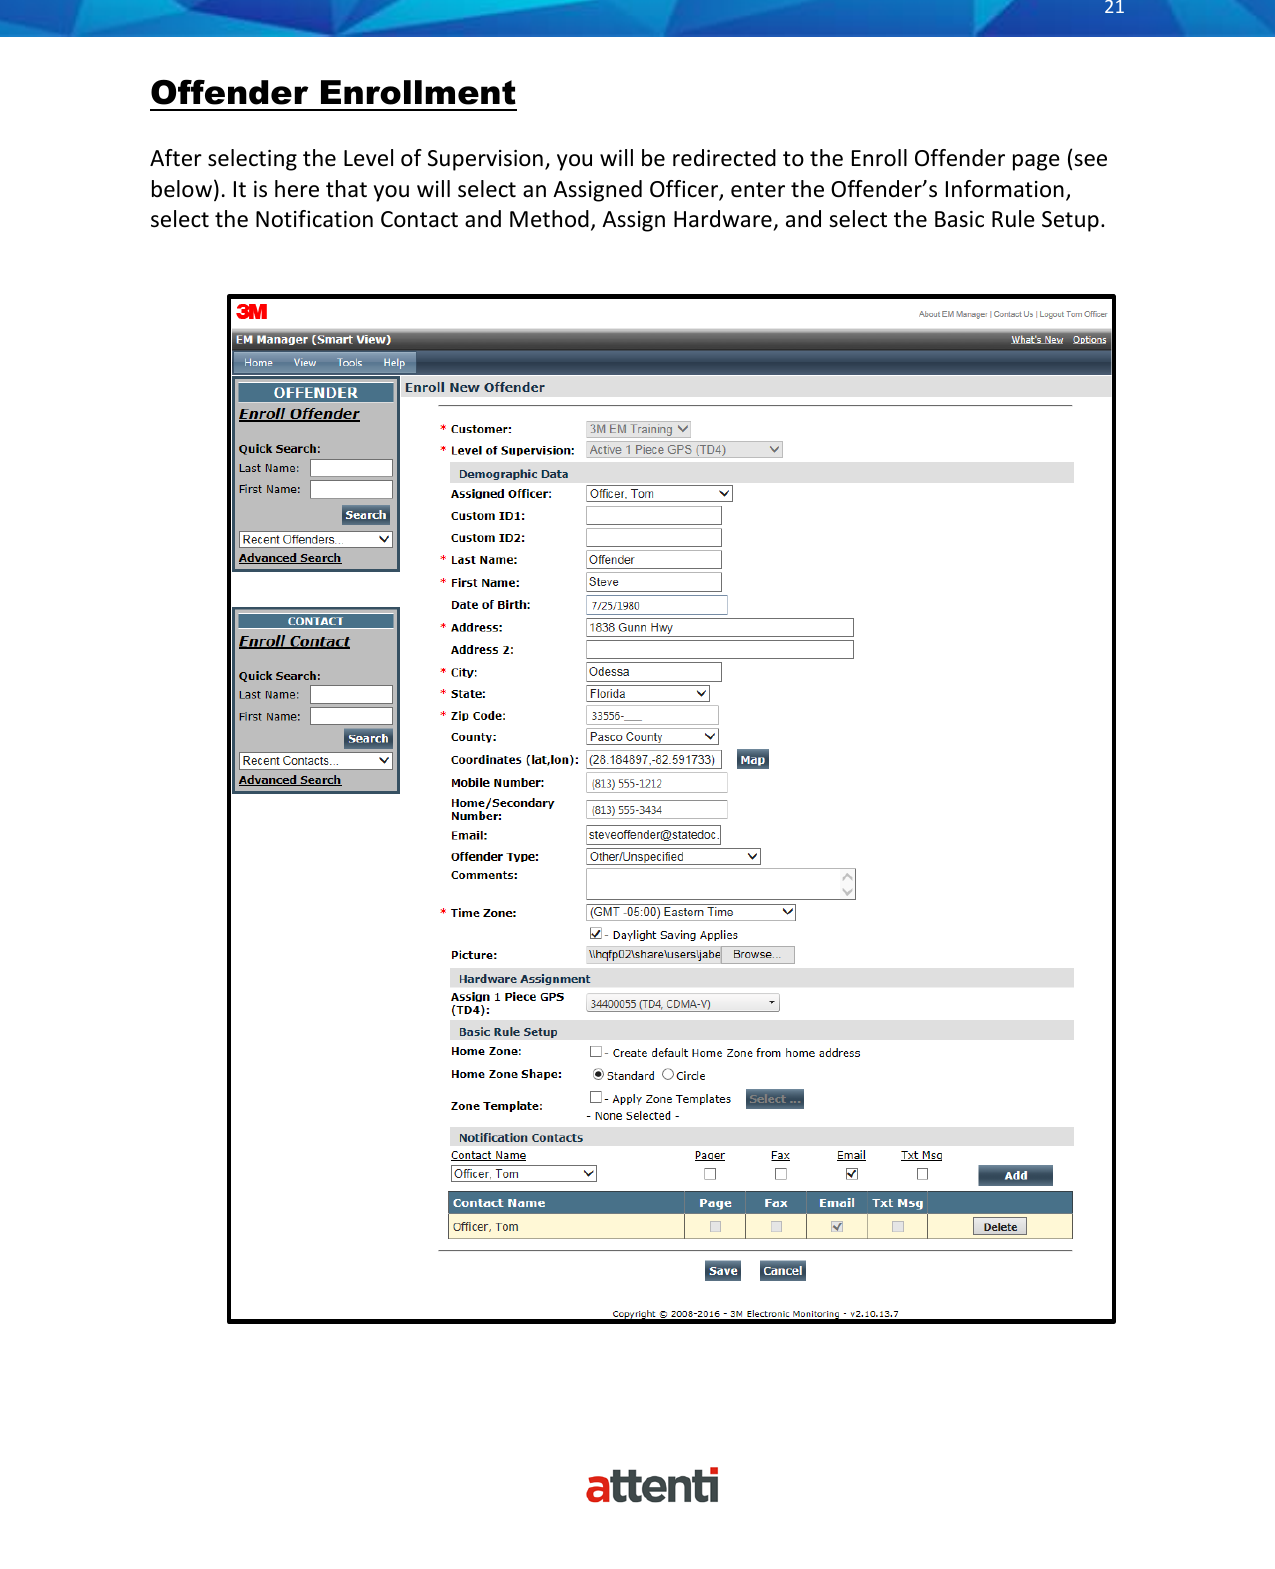       21          Offender Enrollment  After selecting the Level of Supervision, you will be redirected to the Enroll Offender page (see below). It is here that you will select an Assigned Officer, enter the Offender’s Information, select the Notification Contact and Method, Assign Hardware, and select the Basic Rule Setup.   